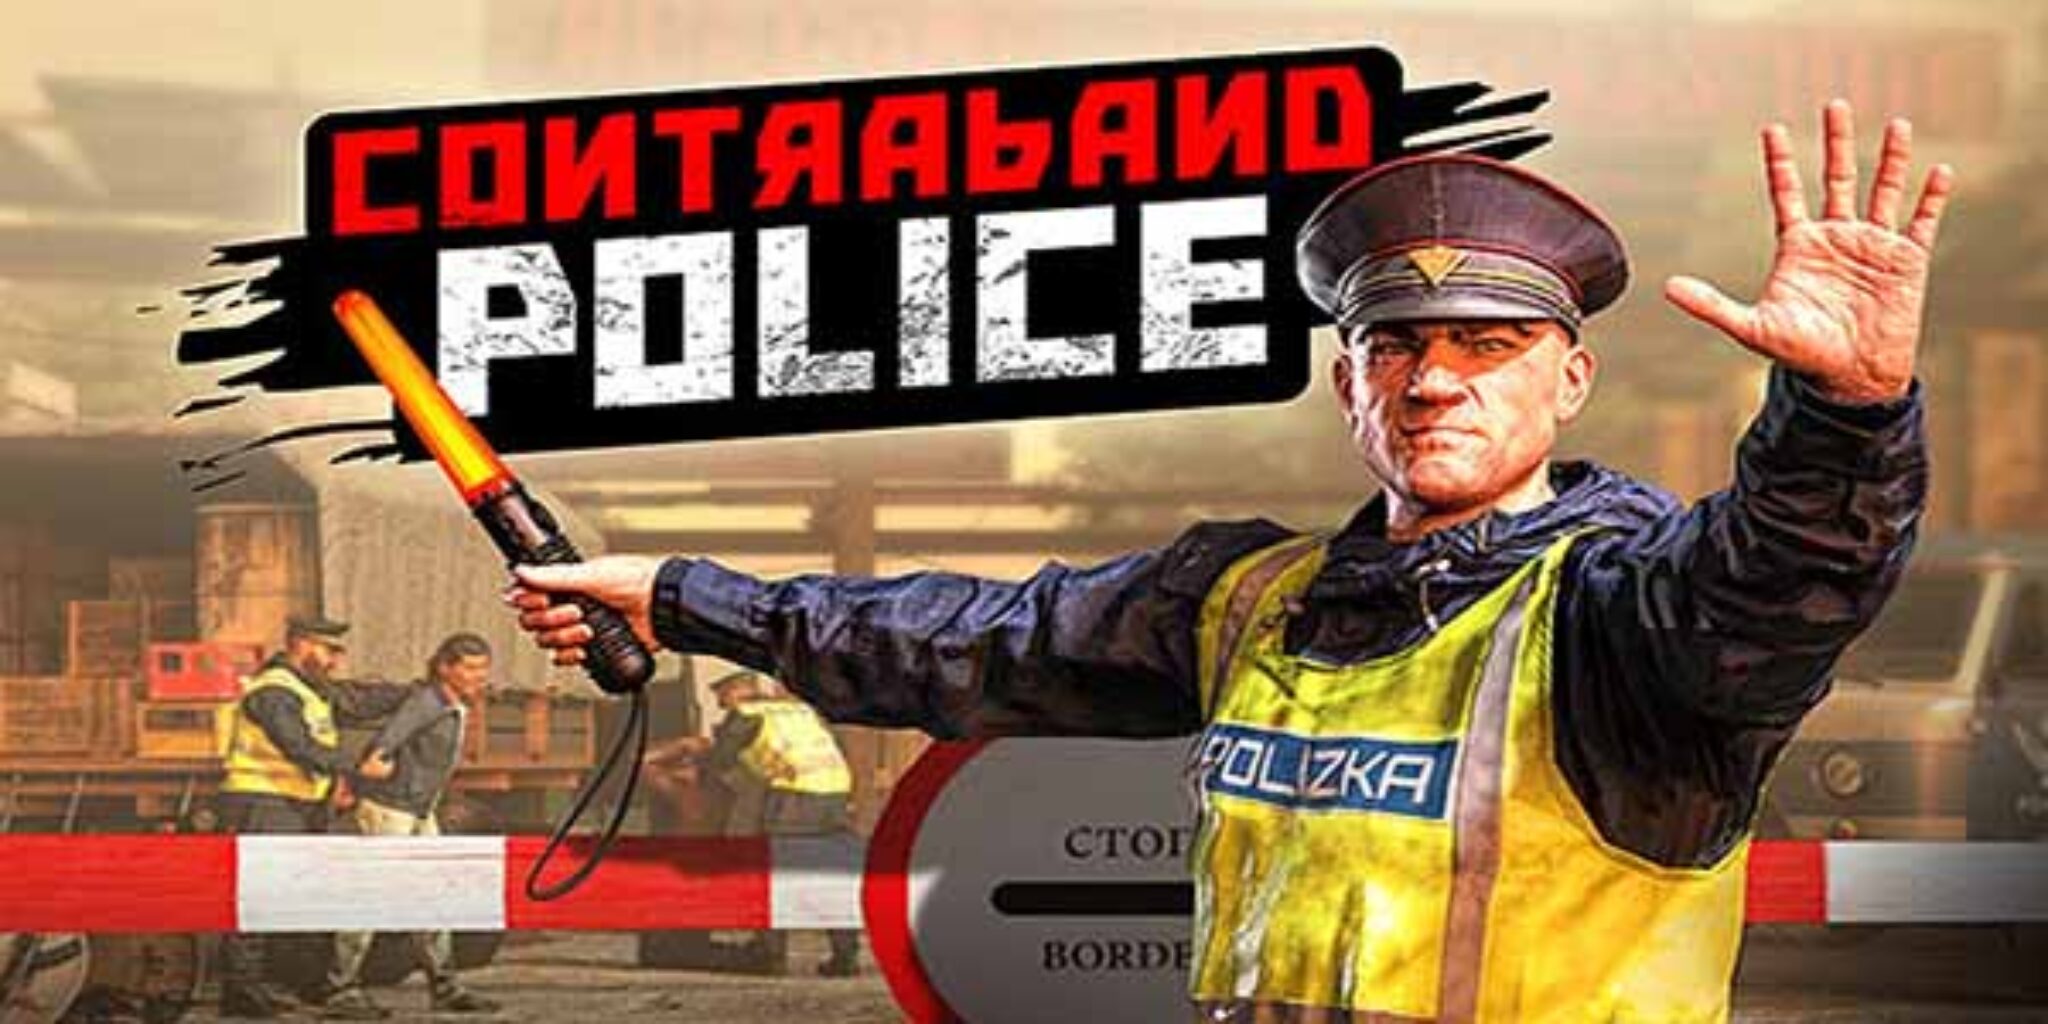 contraband police licence key download